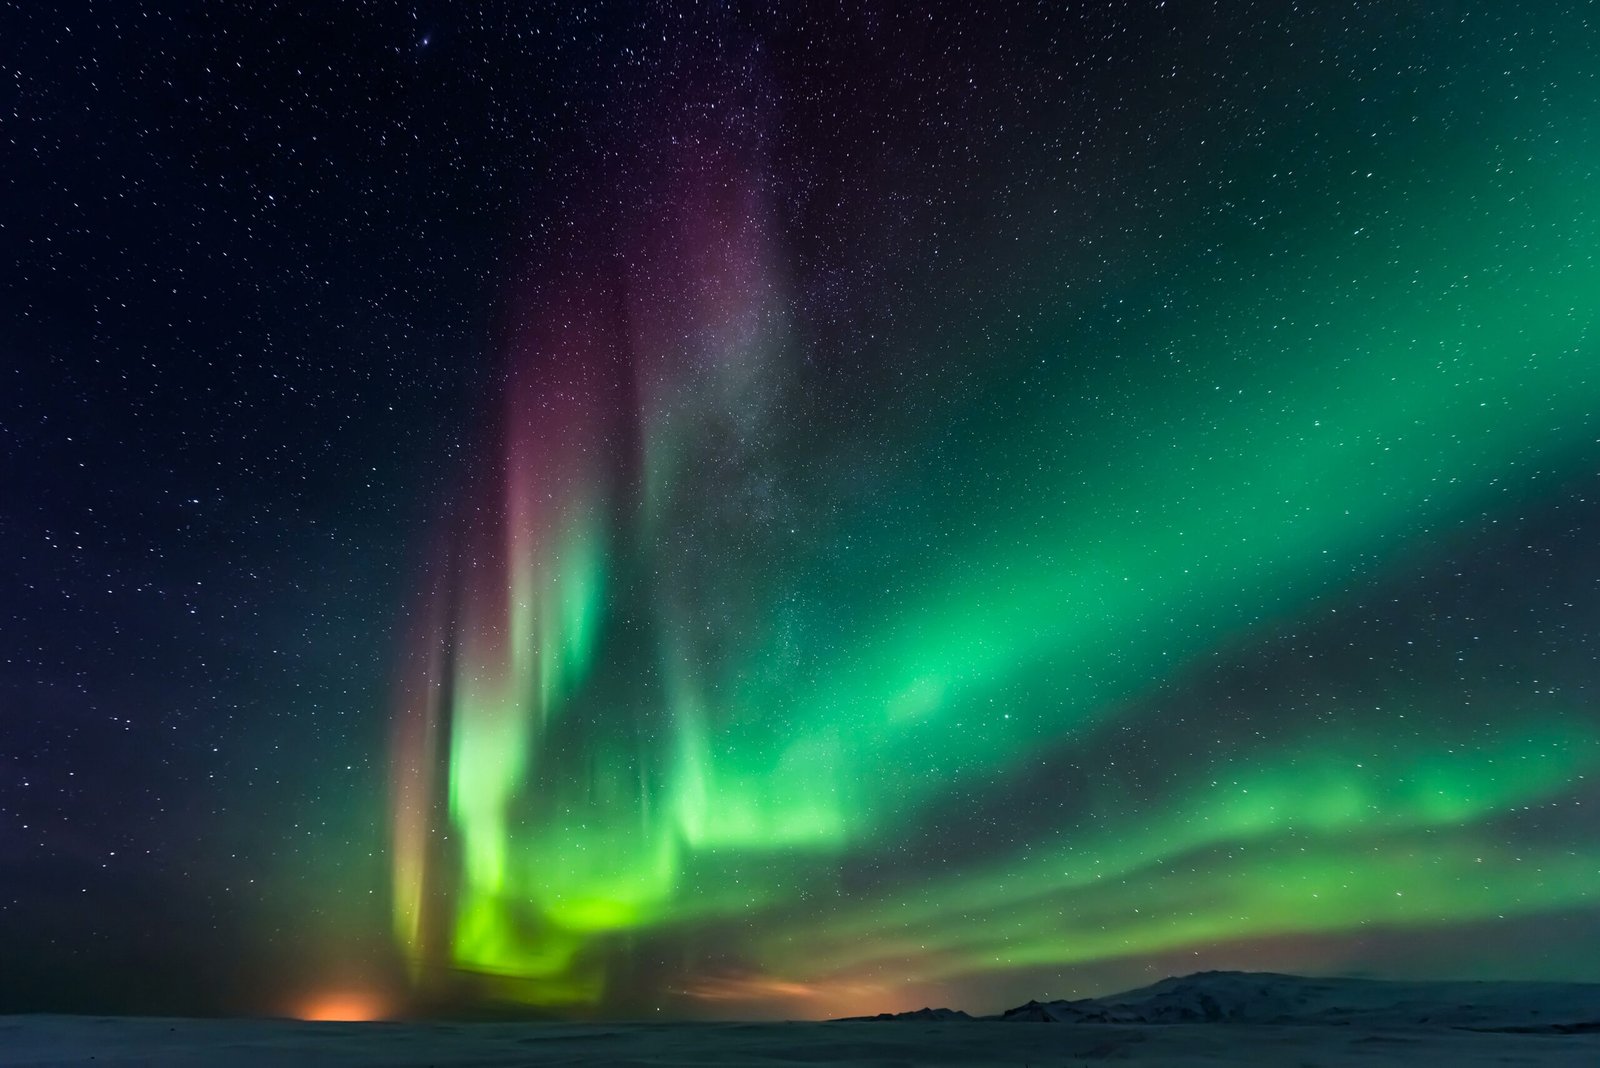 Northern Lights Expected To Be Visible On Sunday Night In 30 States Of Northern US